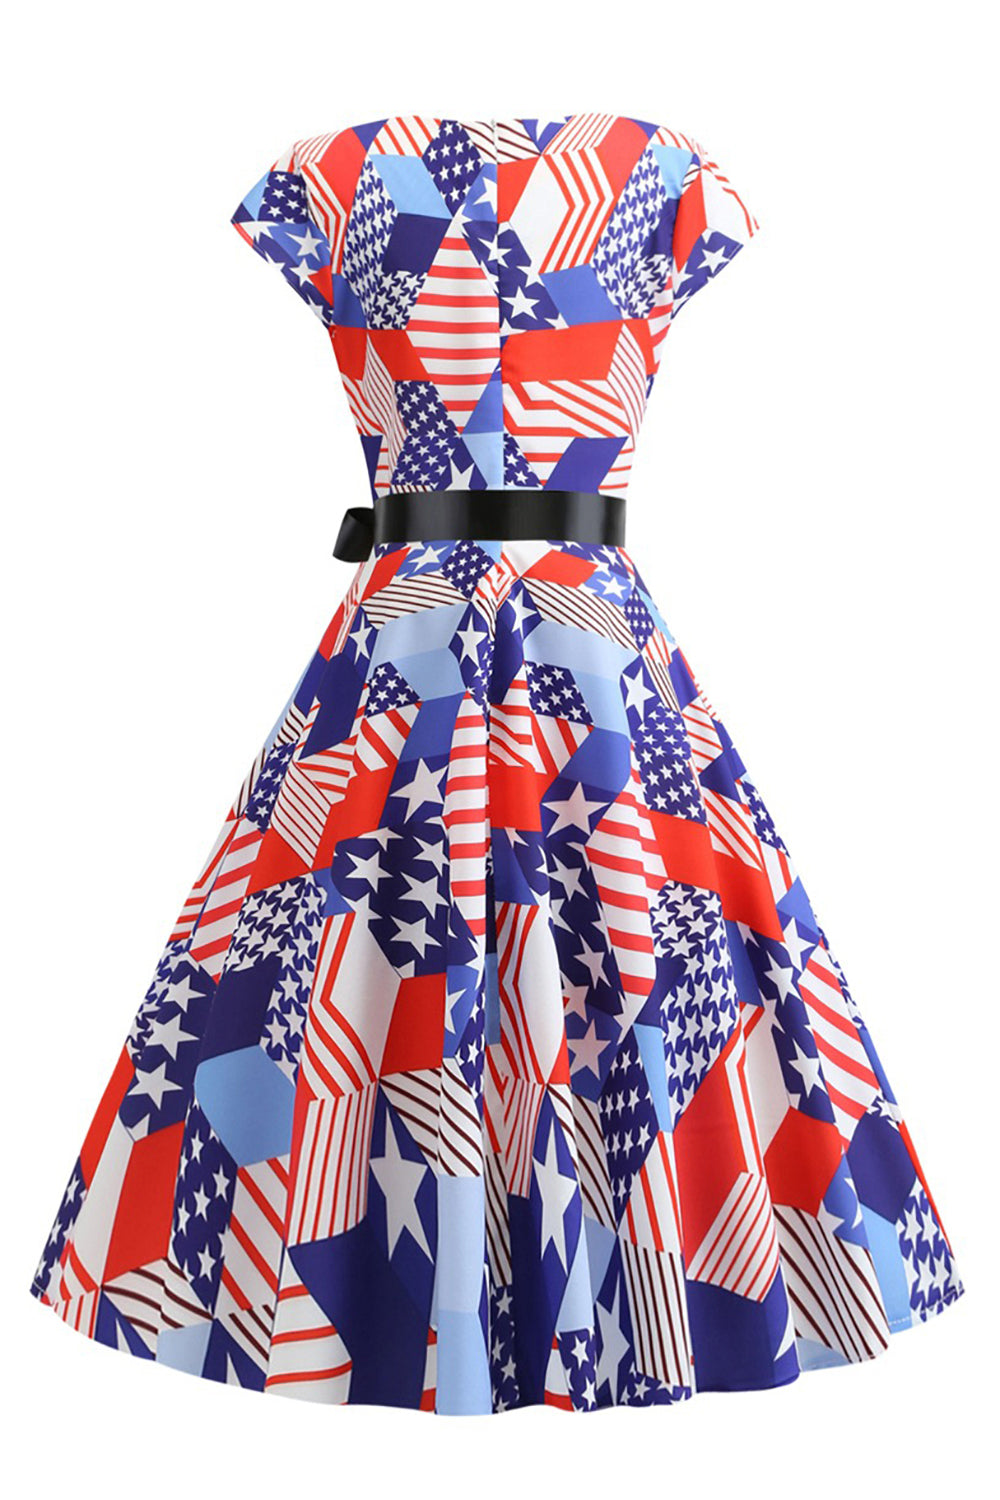 American Flag Printed Retro Dress with Bowknot